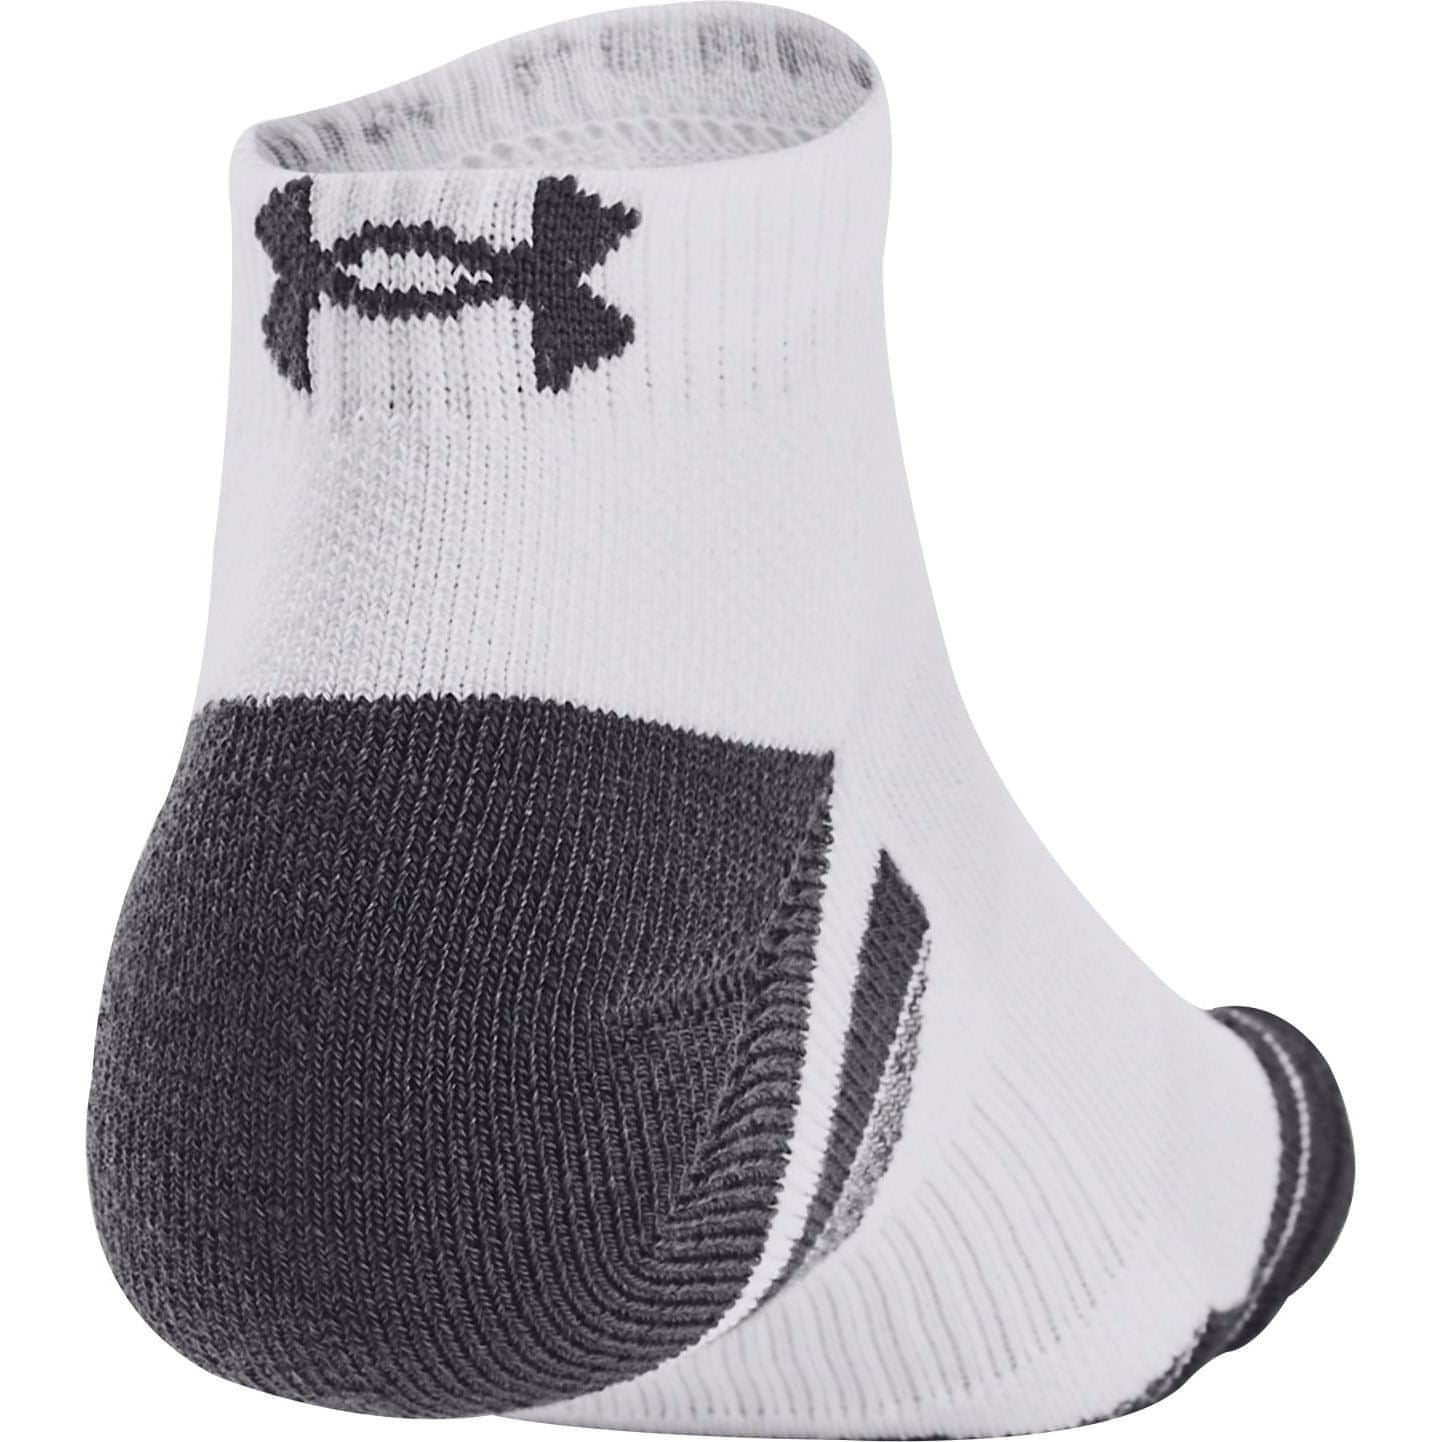 Under Armour Performance Tech Pack Low Cut Socks Back View